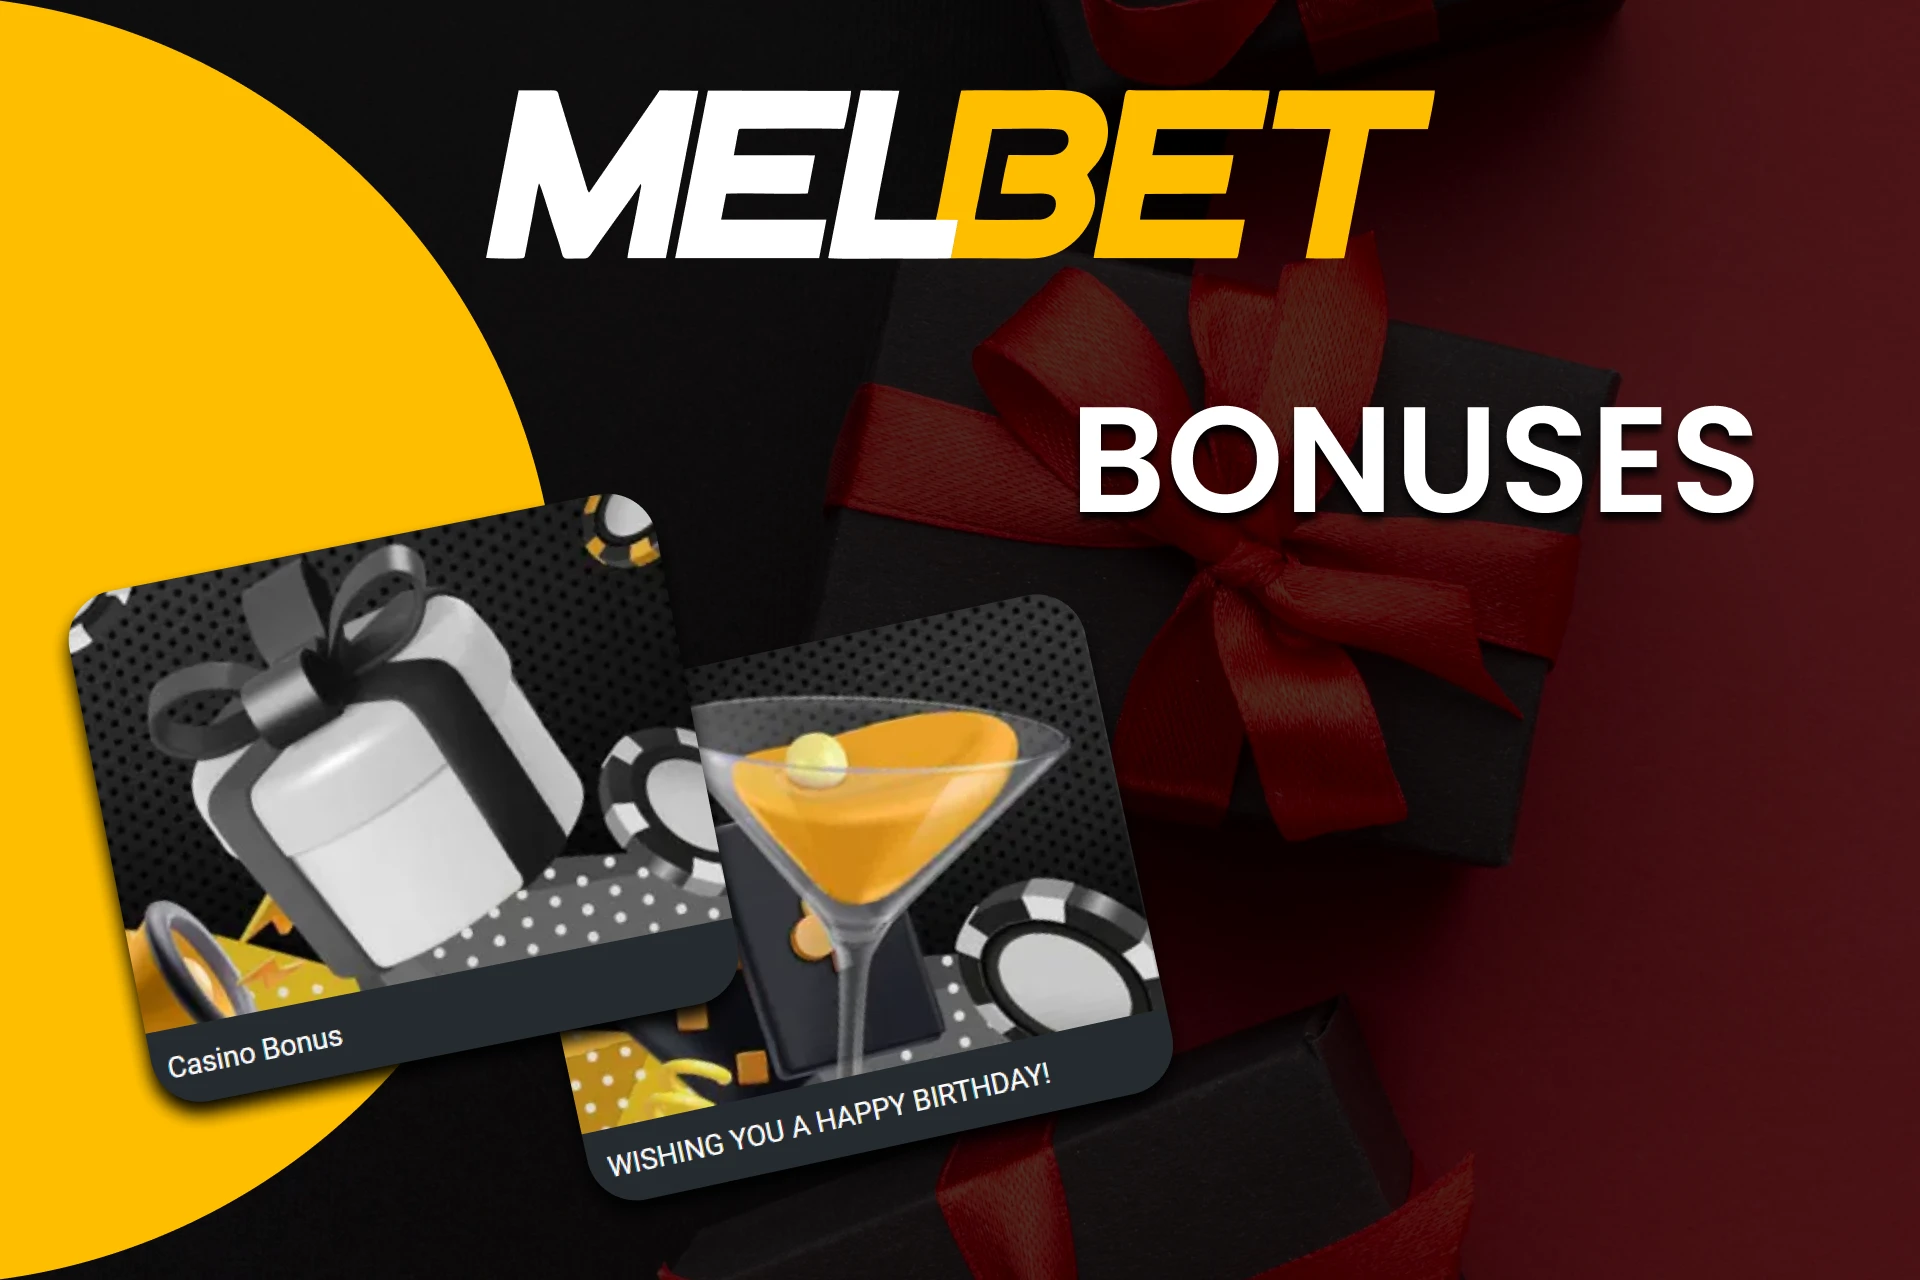 Melbet gives bonuses for games to all users.